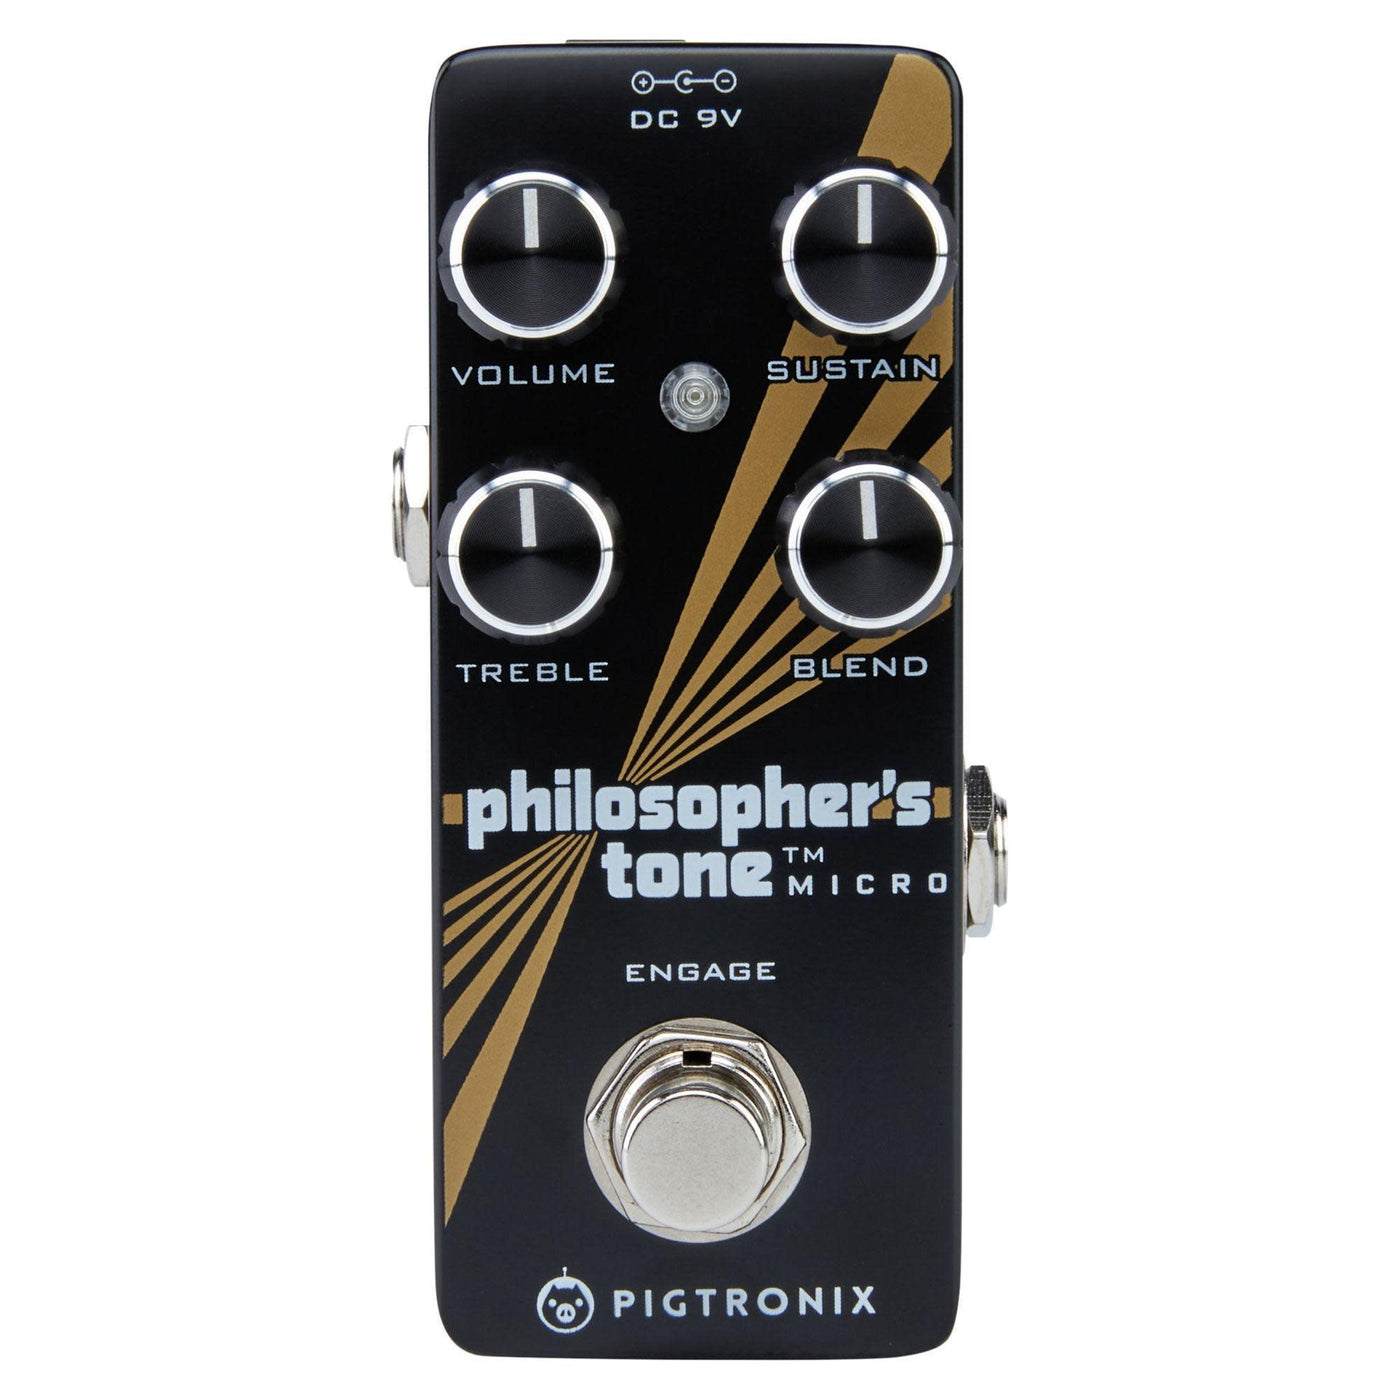 Pigtronix PTM Philosopher's Tone Micro Optical Compressor and Sustainer Foot Pedal